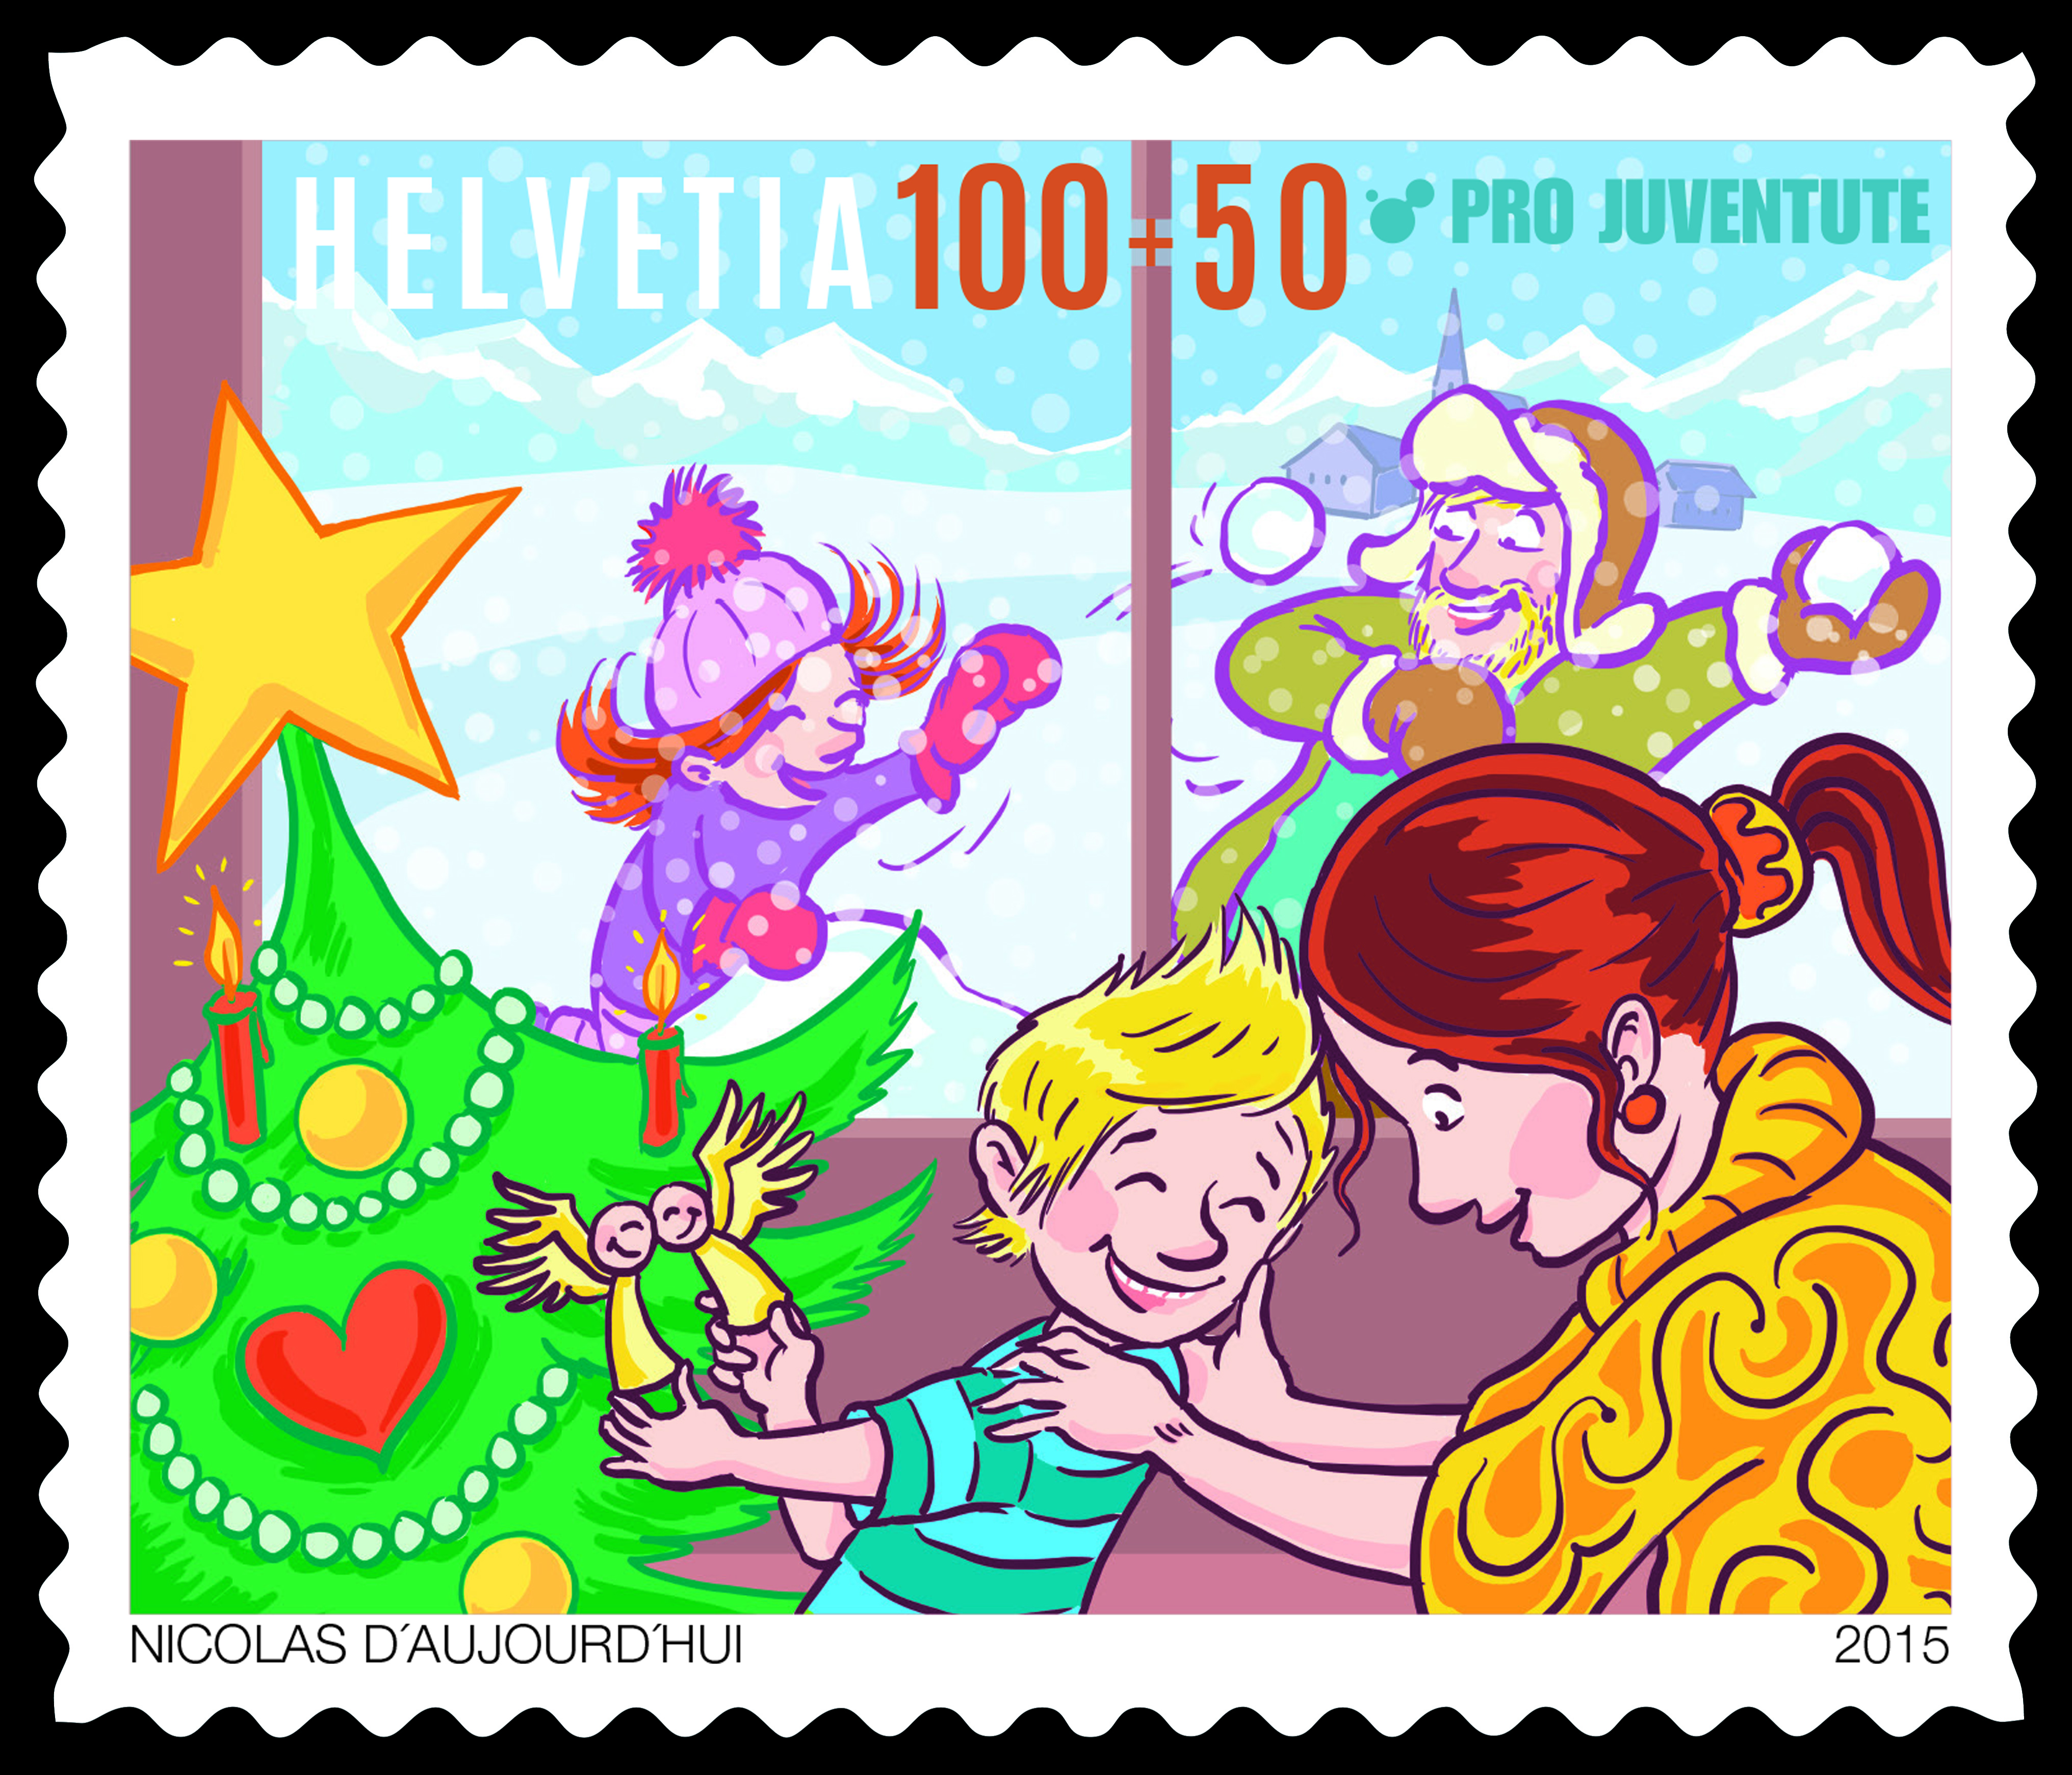 Pro Juventute – Special stamps “Christmas” JPG 5 8 MB